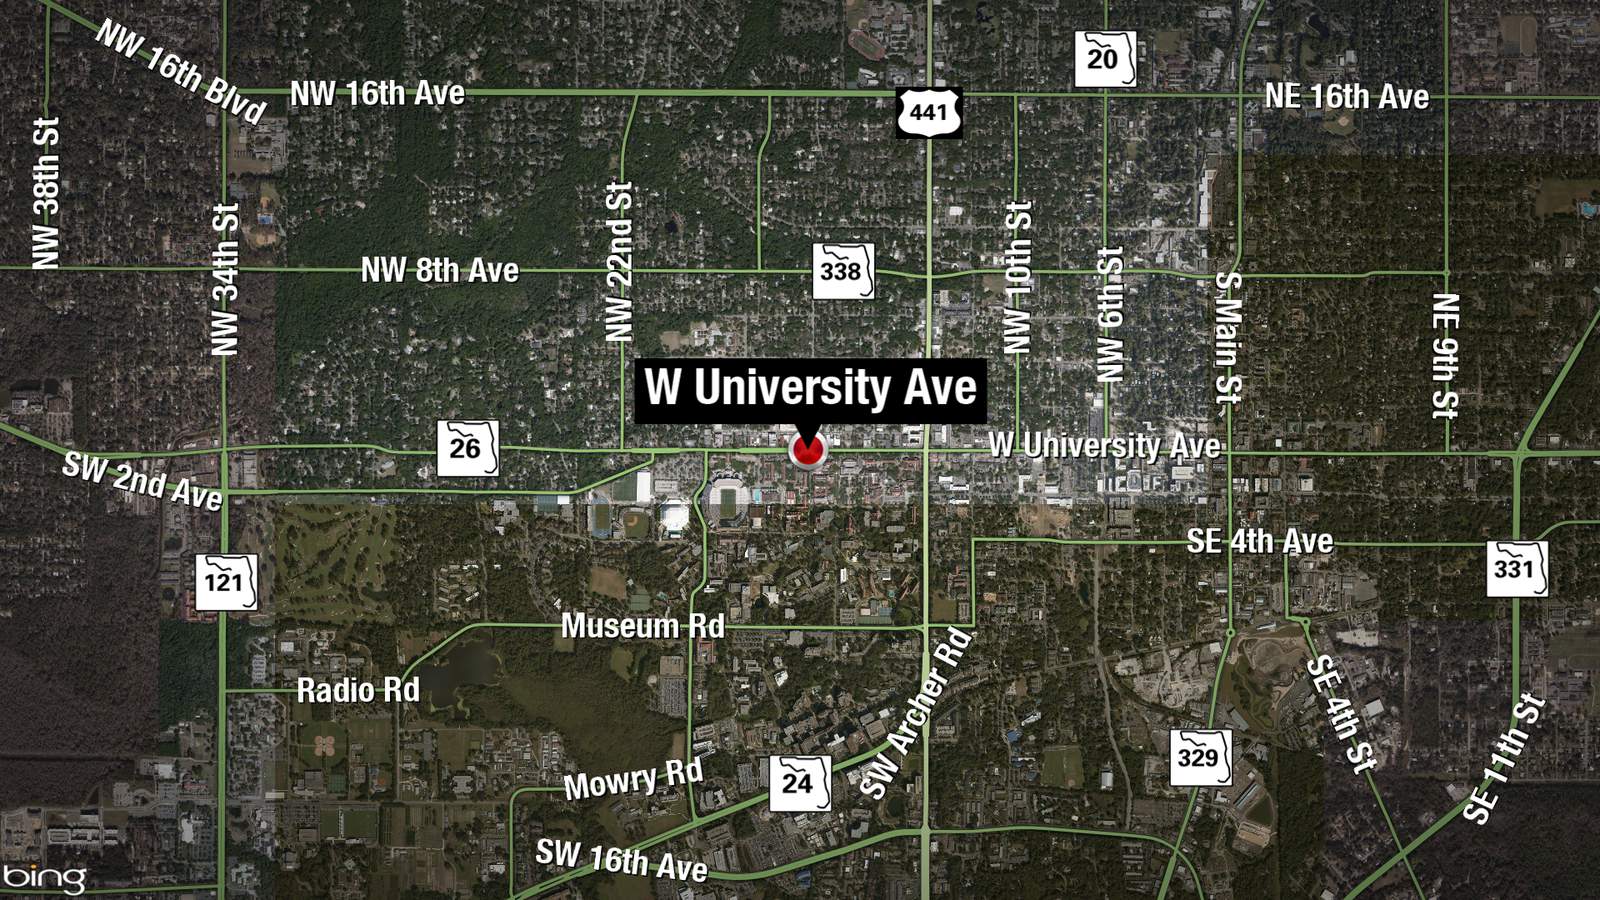 5 UF students struck, 1 fatally, after 2 cars collide, Gainesville police say